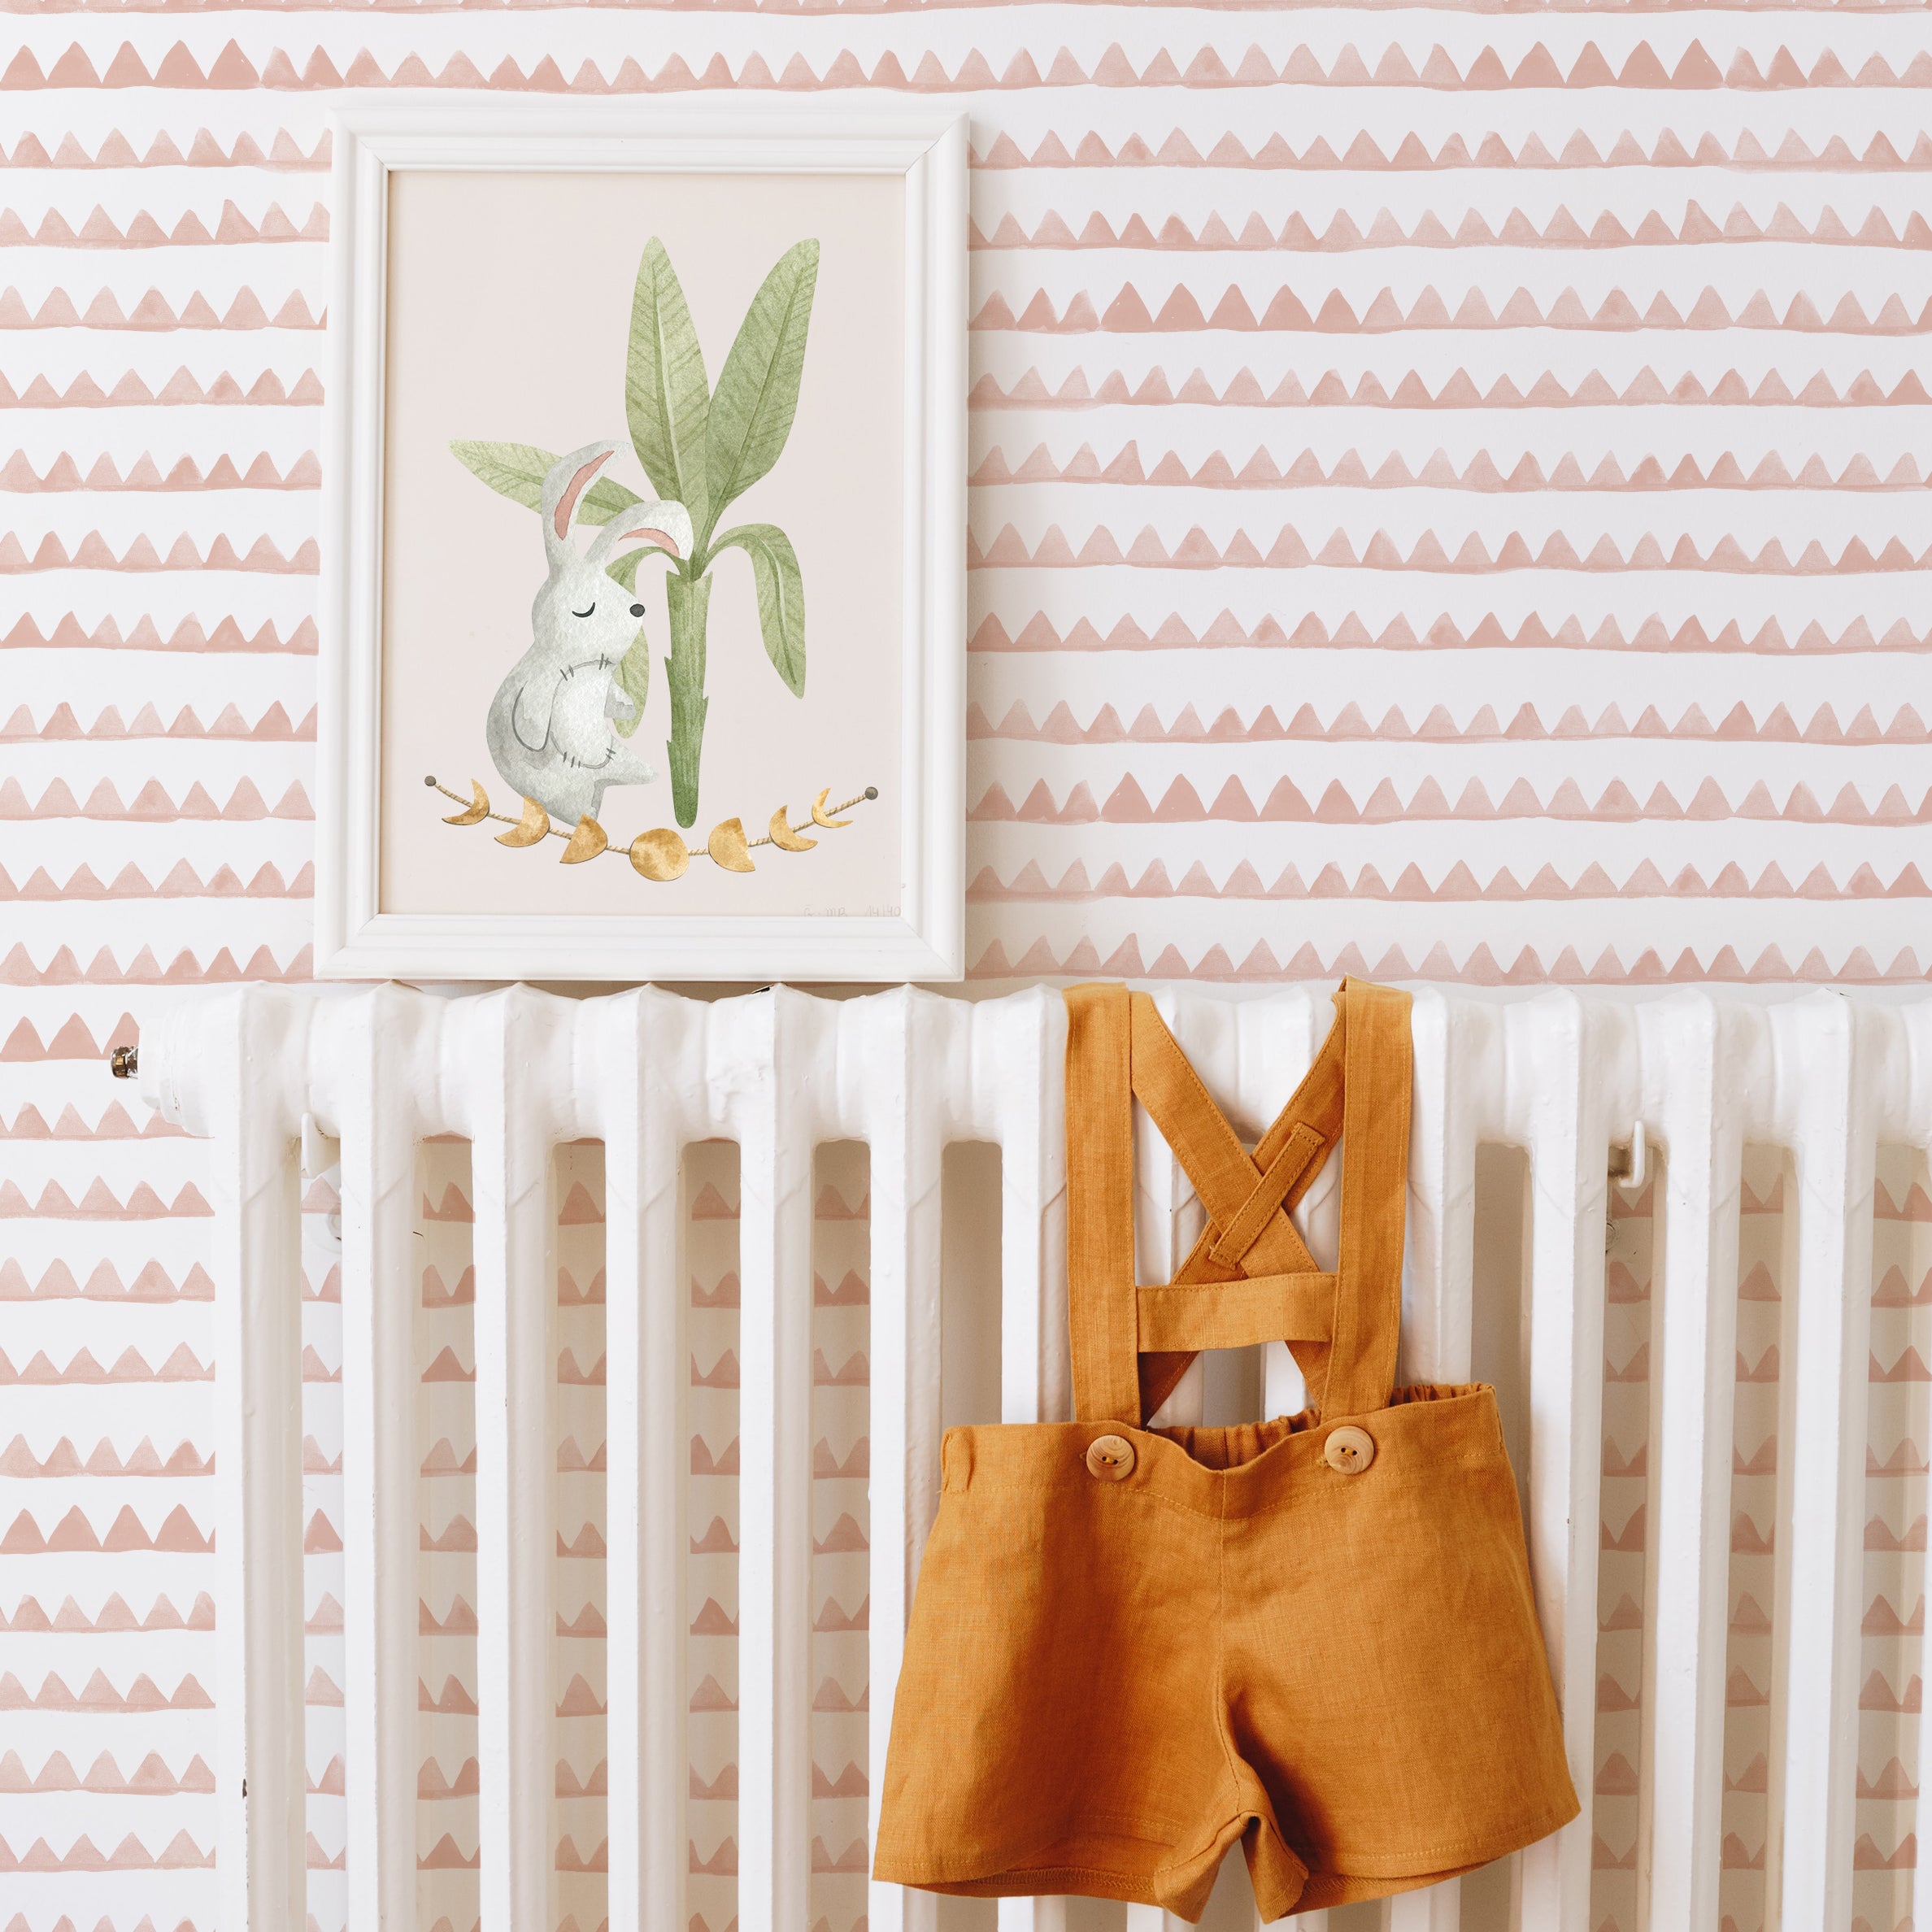 A charming nursery setup featuring the Kids Boho Wallpaper - 46, with muted terracotta zigzag patterns on a white background. The scene includes a framed illustration of a rabbit under a plant, and mustard-colored baby overalls hung on a white crib, creating a warm and inviting atmosphere.